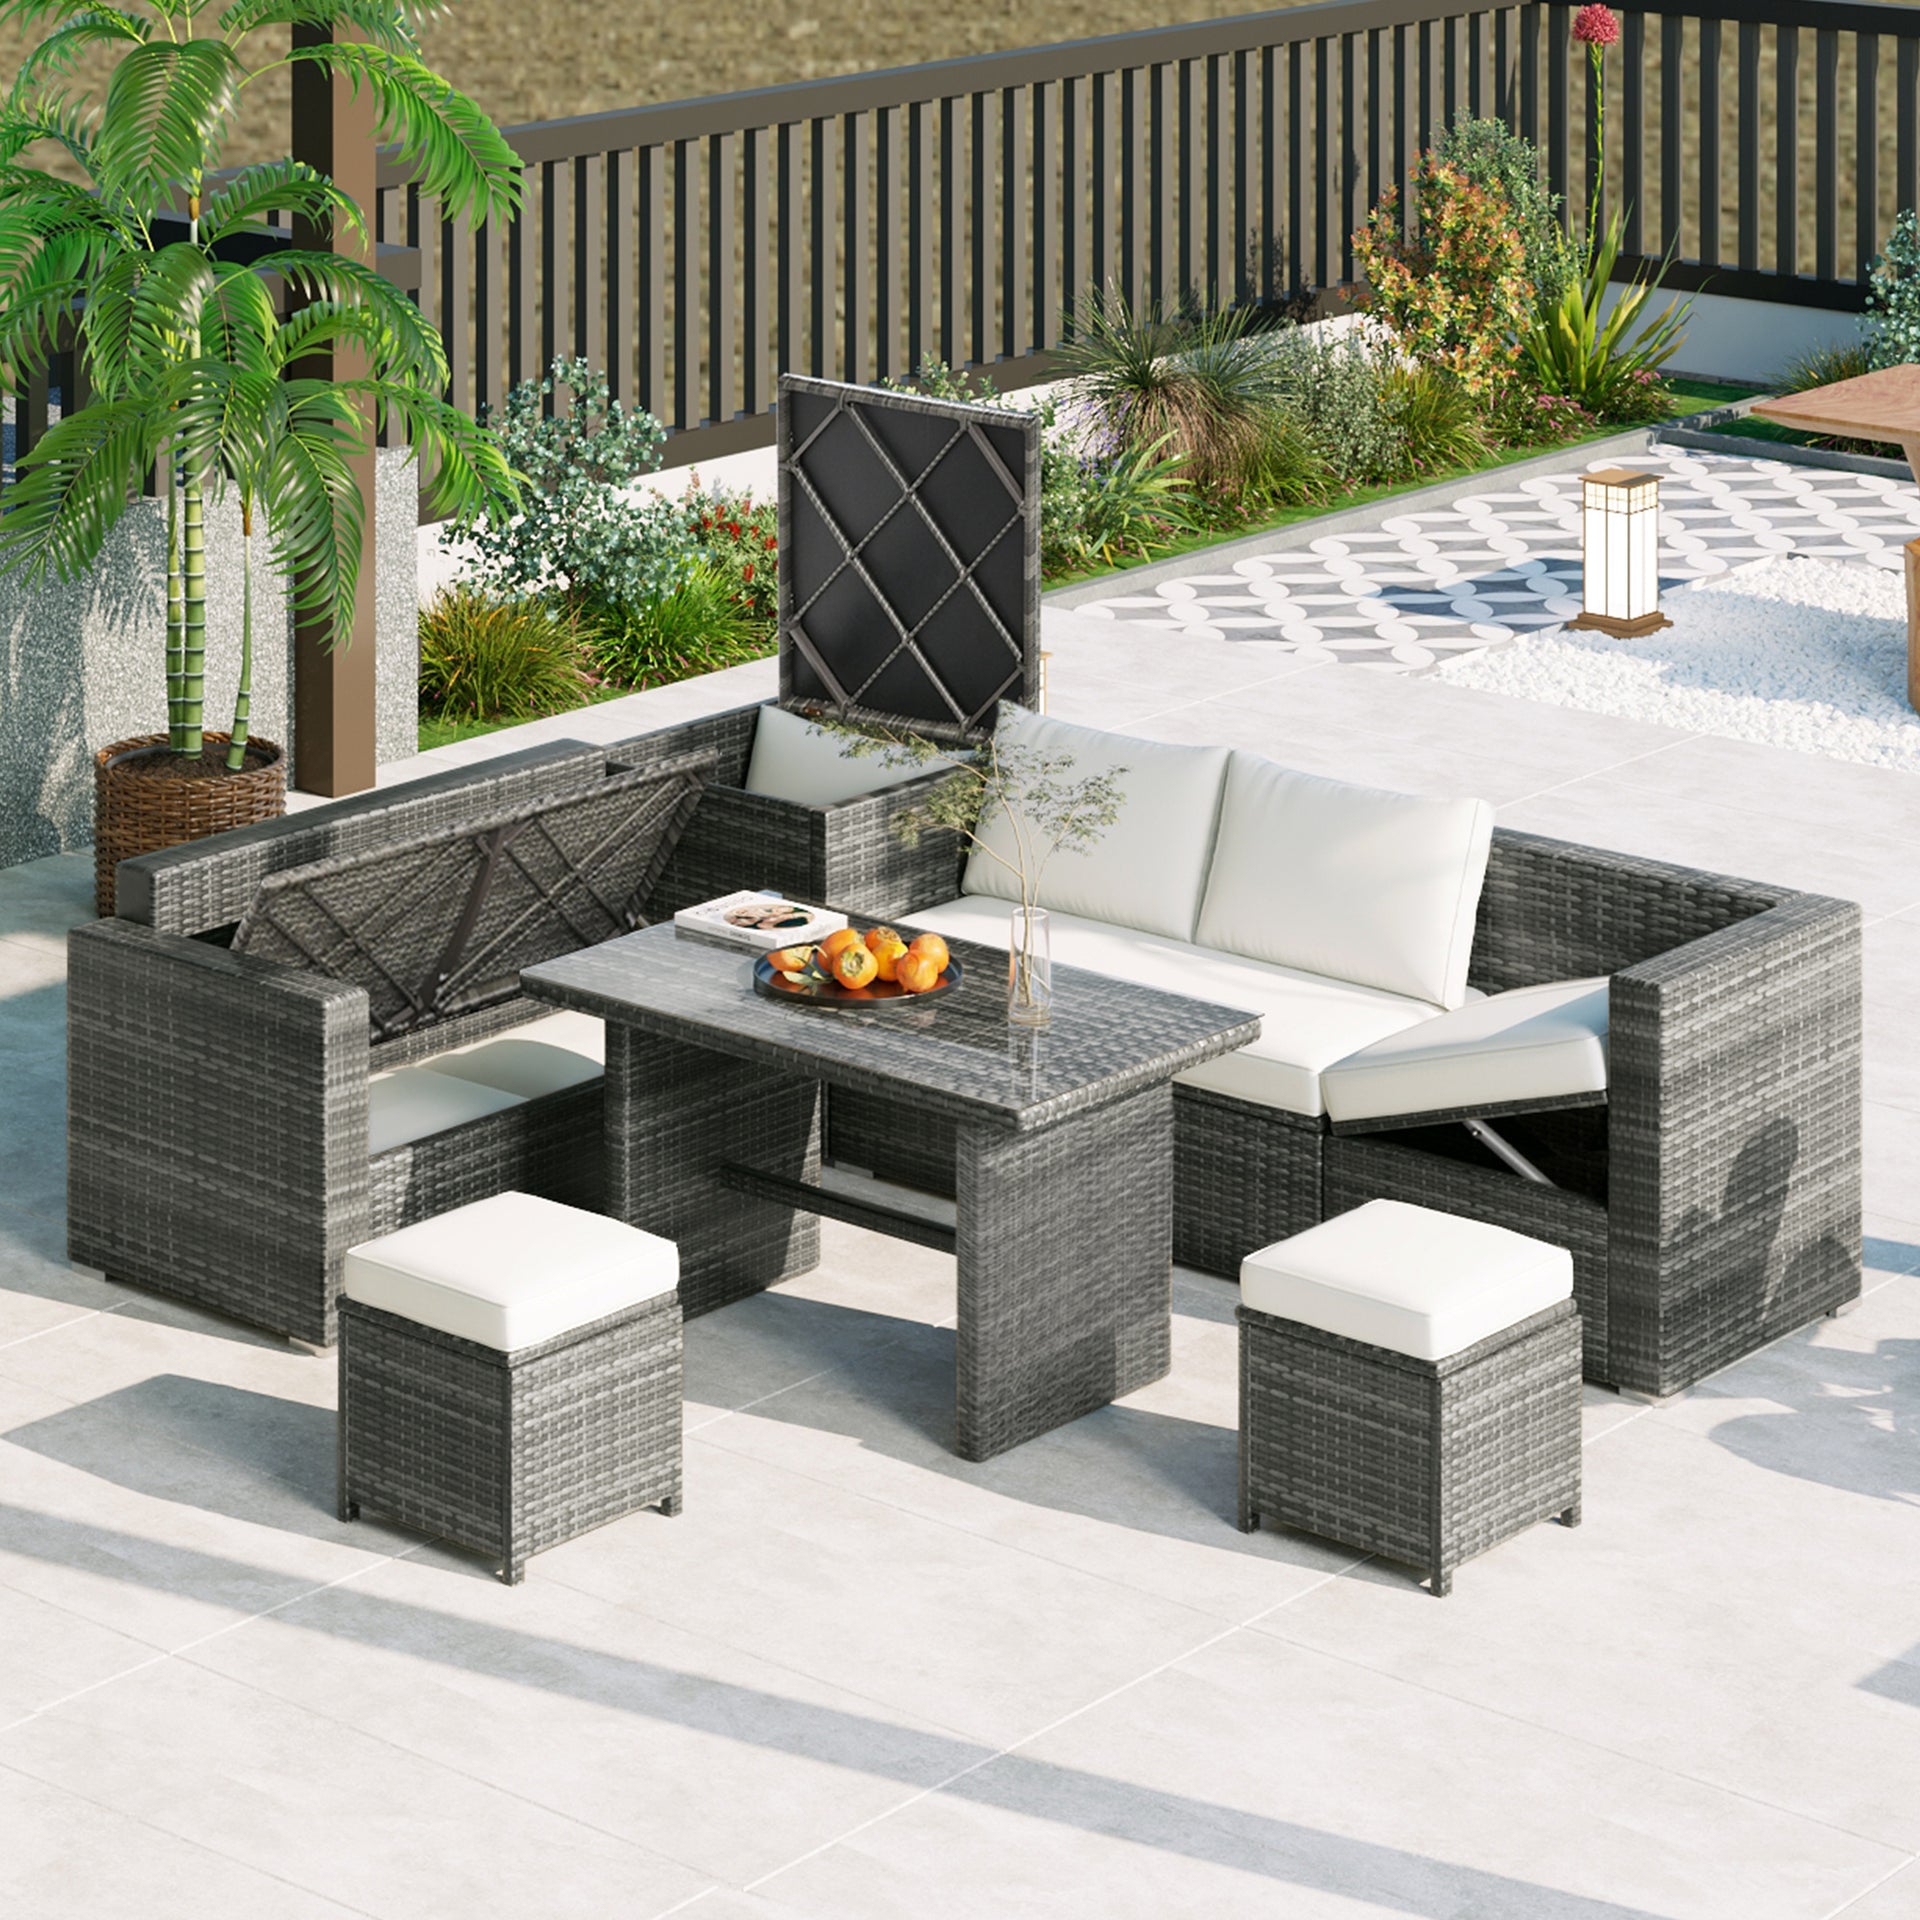 6-Piece Garden Patio Sectional Sofa Set with Storage and Removable Covers